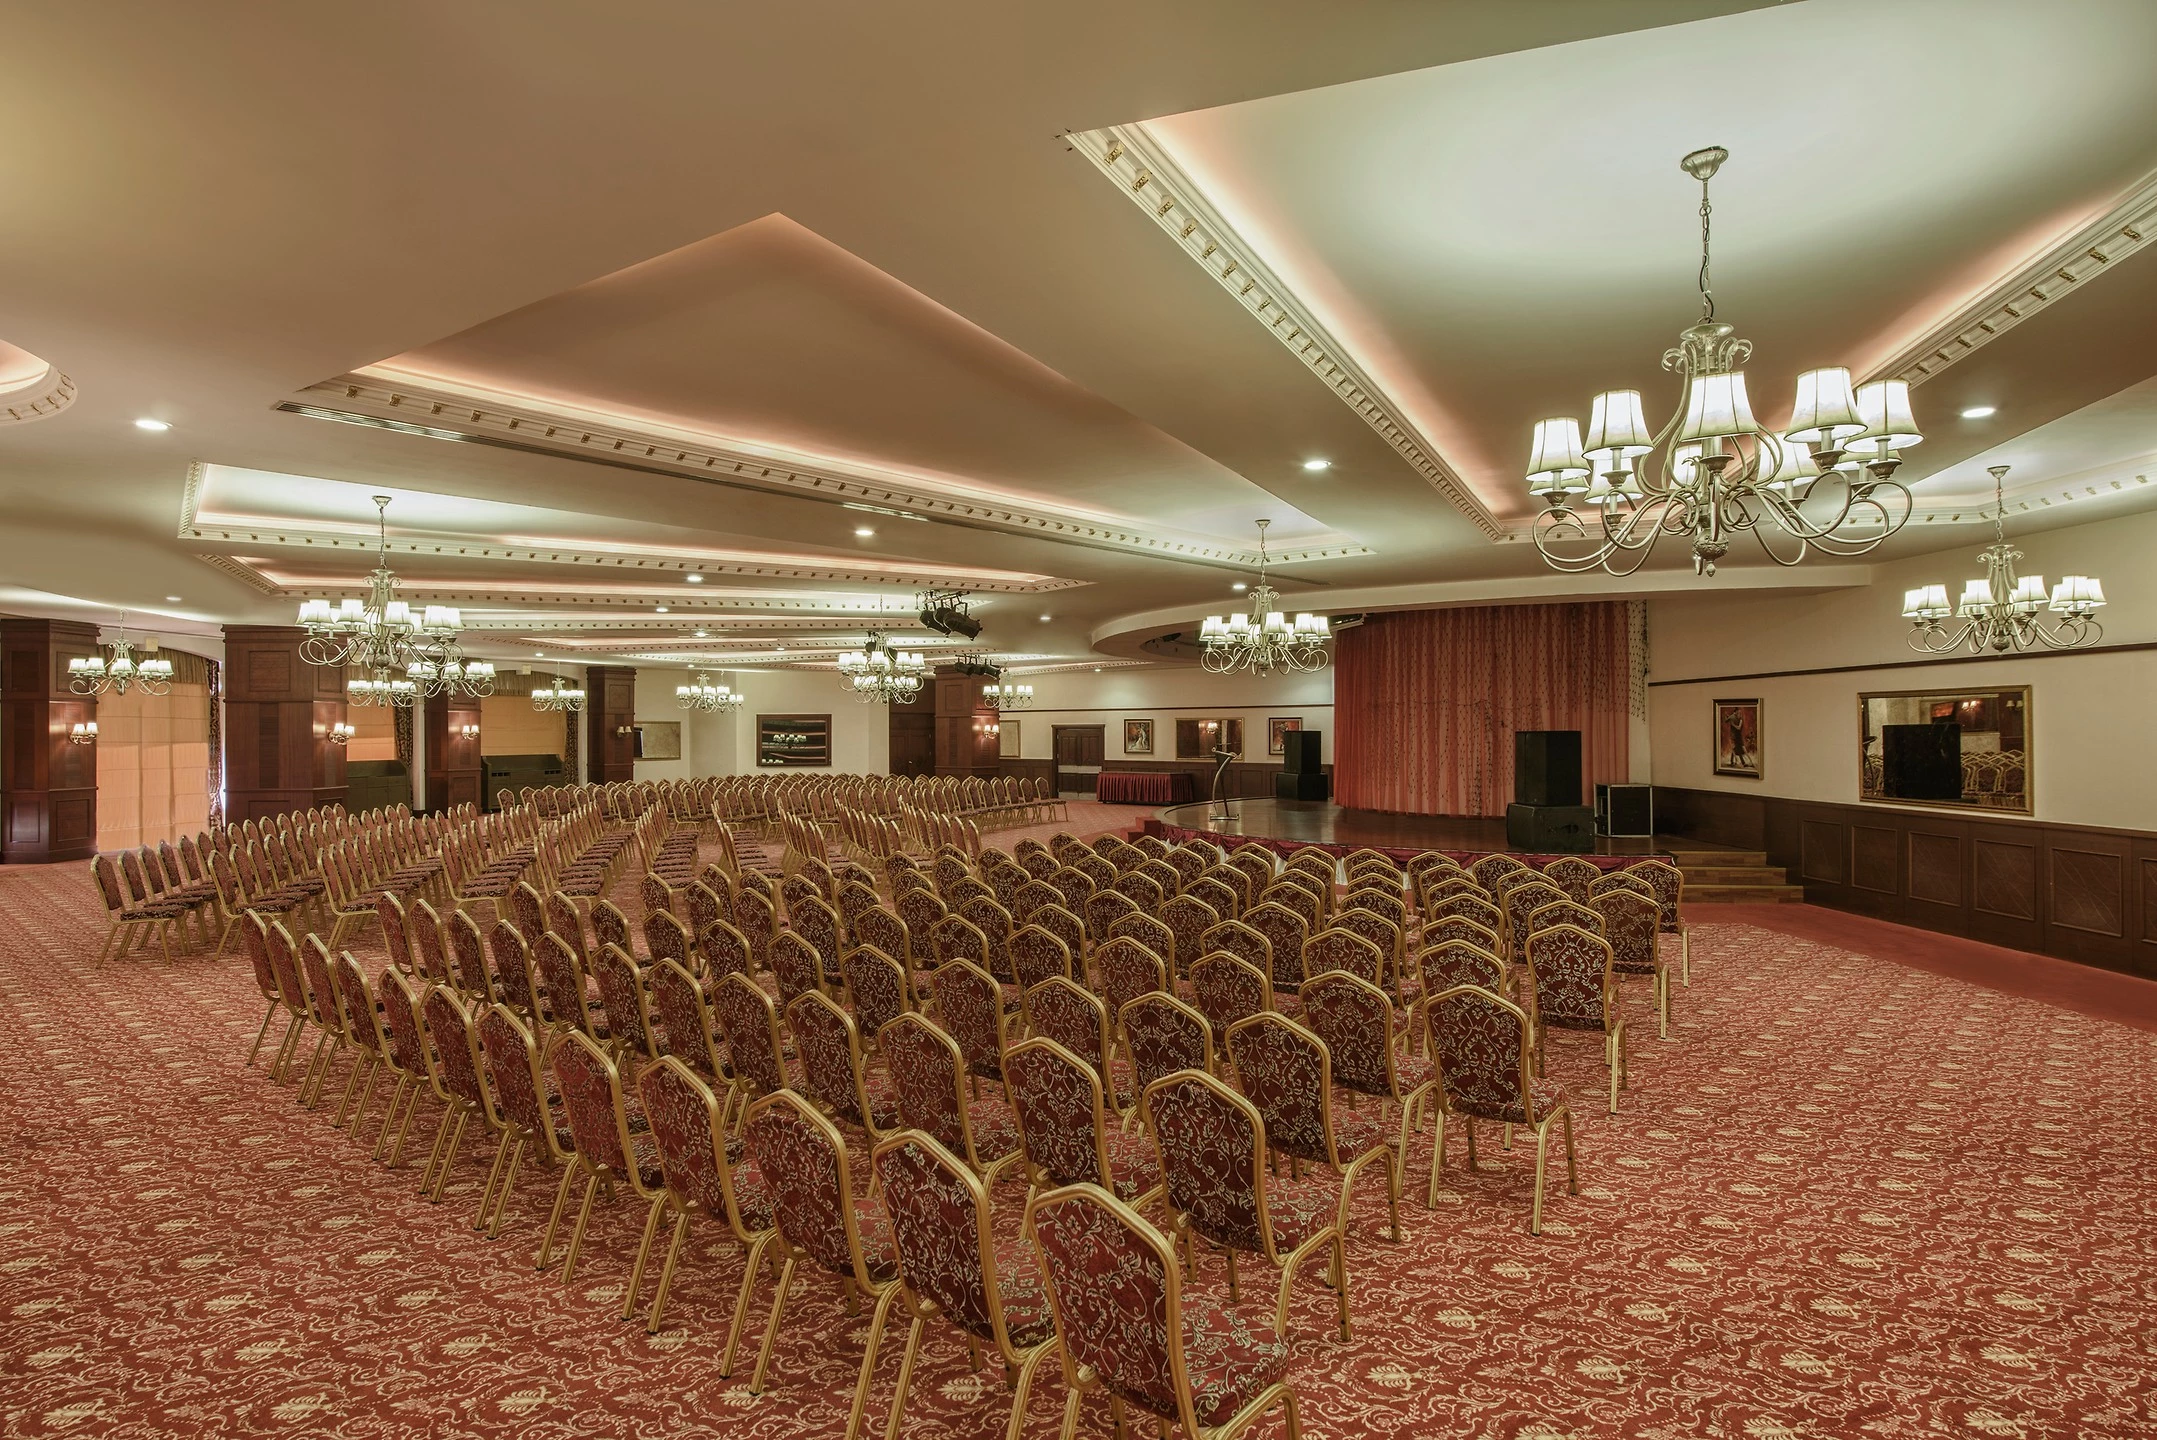 delphin-palace-hotel-meeting-3743